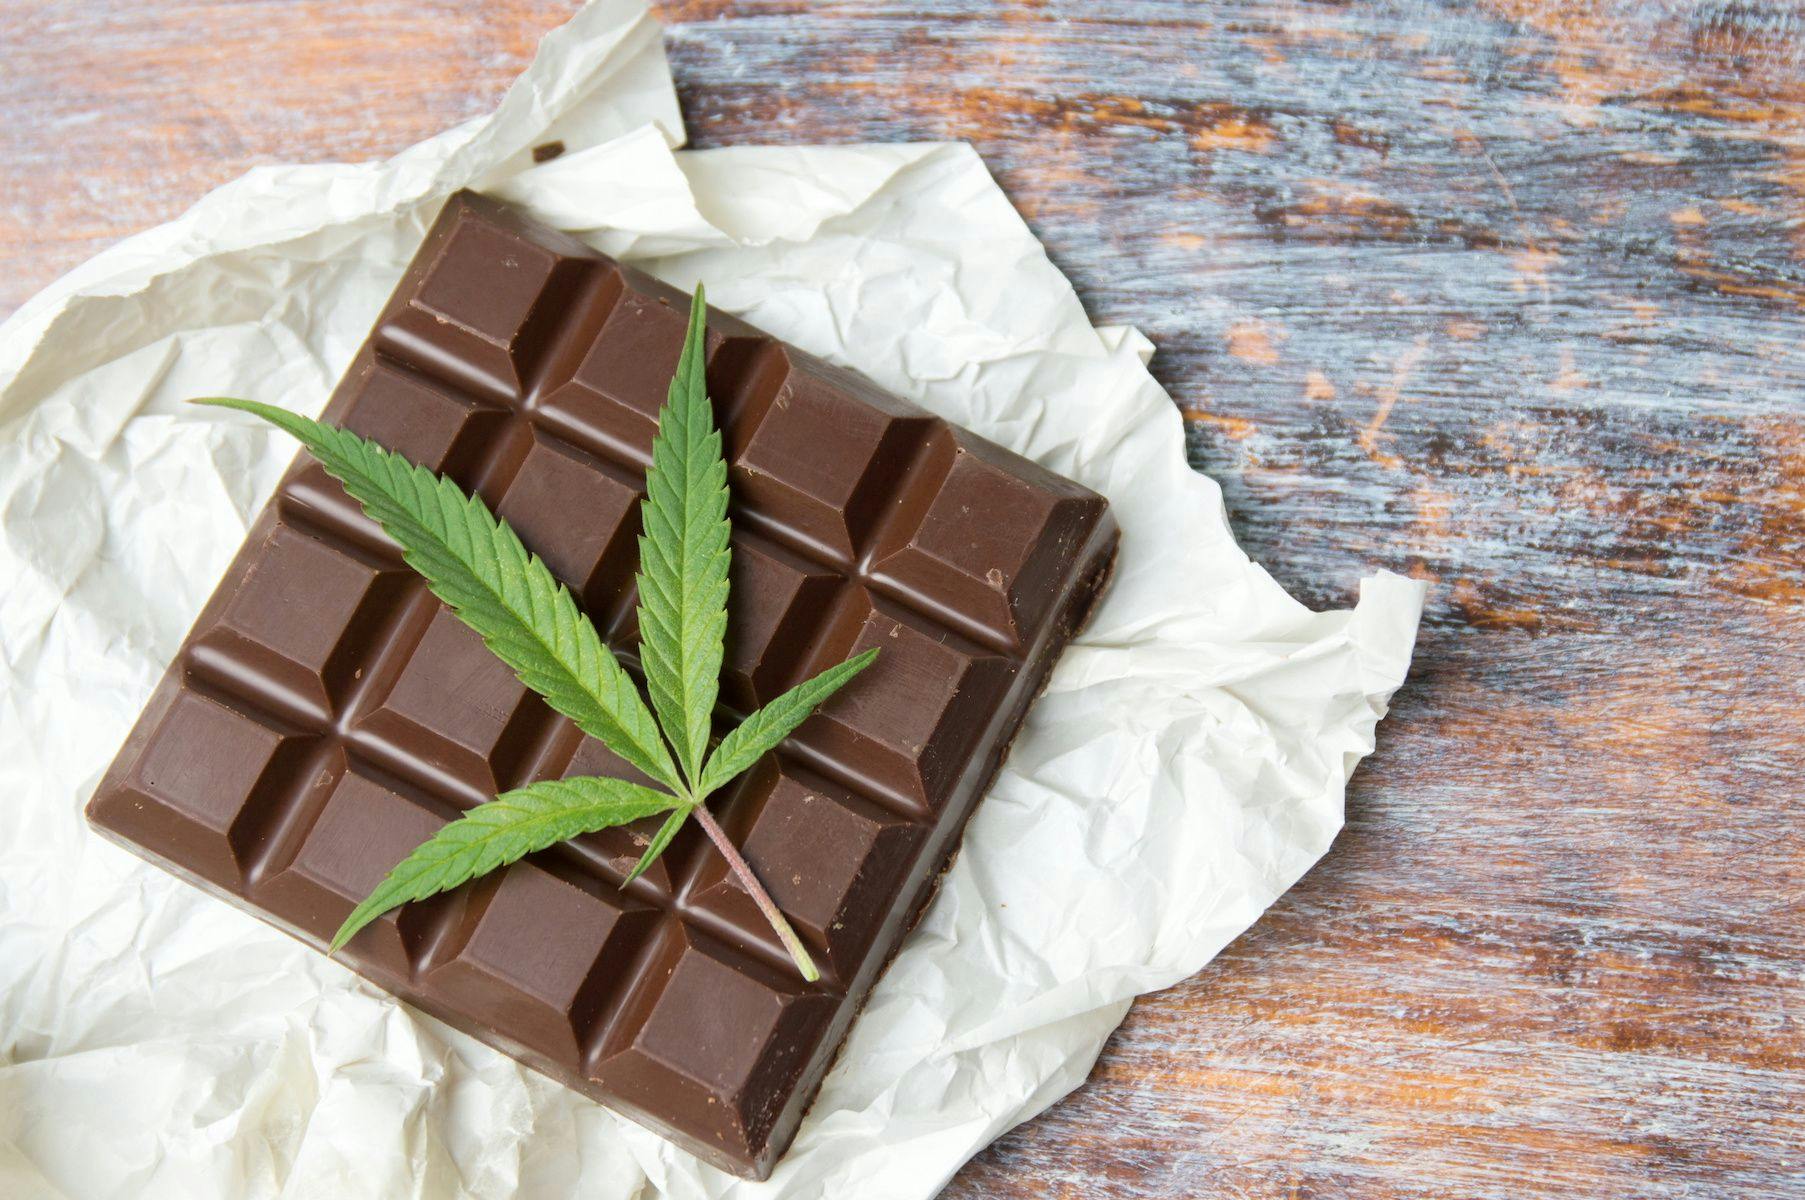 Emergency Visits in Canada Tripled After Legalization of Edible Cannabis